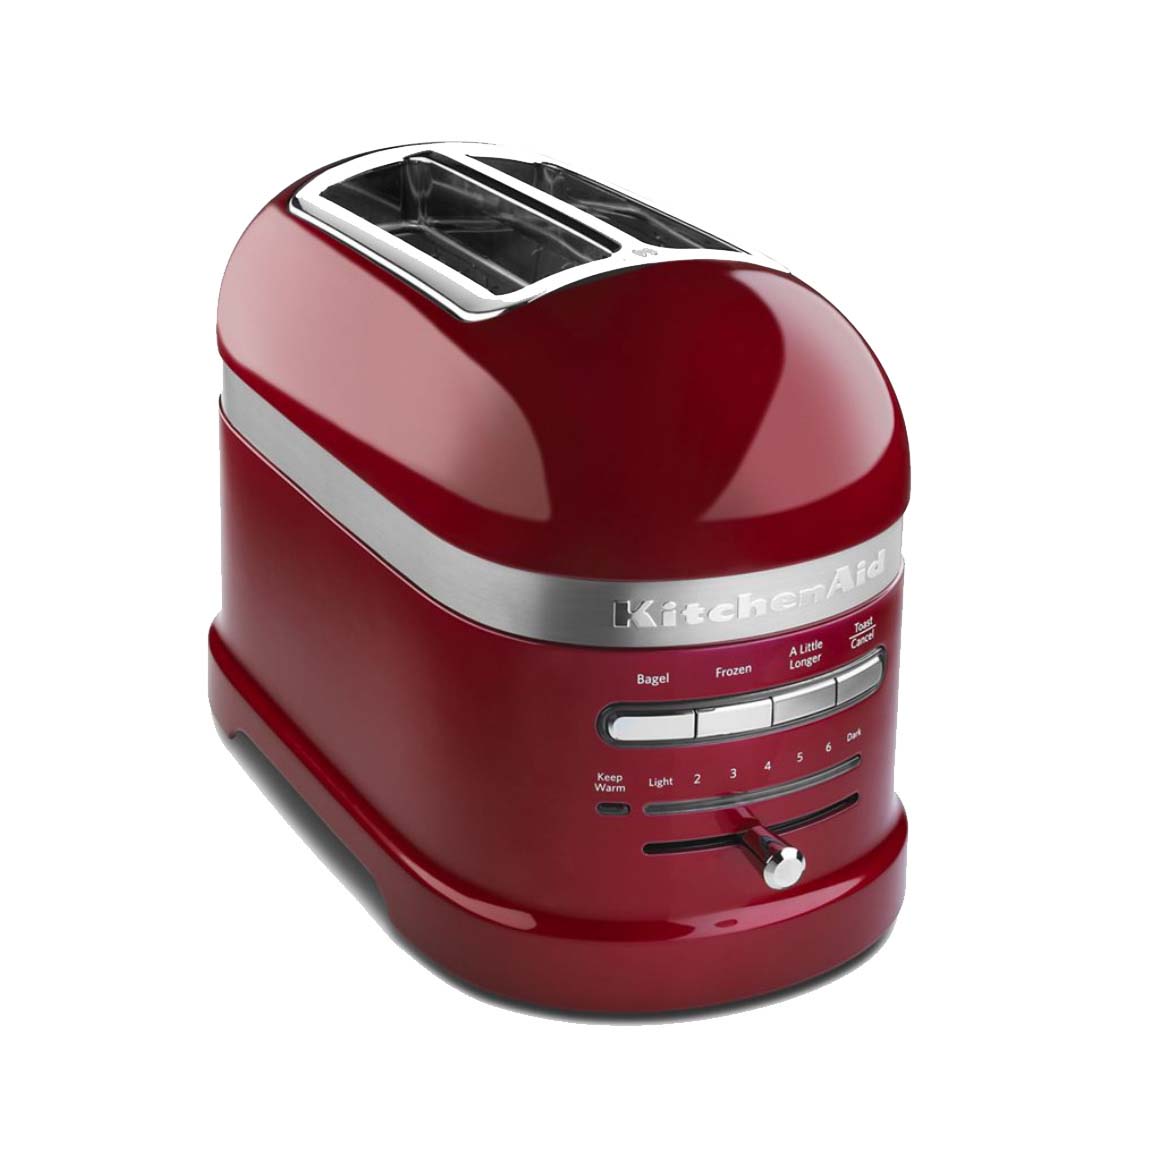 Image of KitchenAid Pro Line Series 2-Slice Automatic Toaster in red